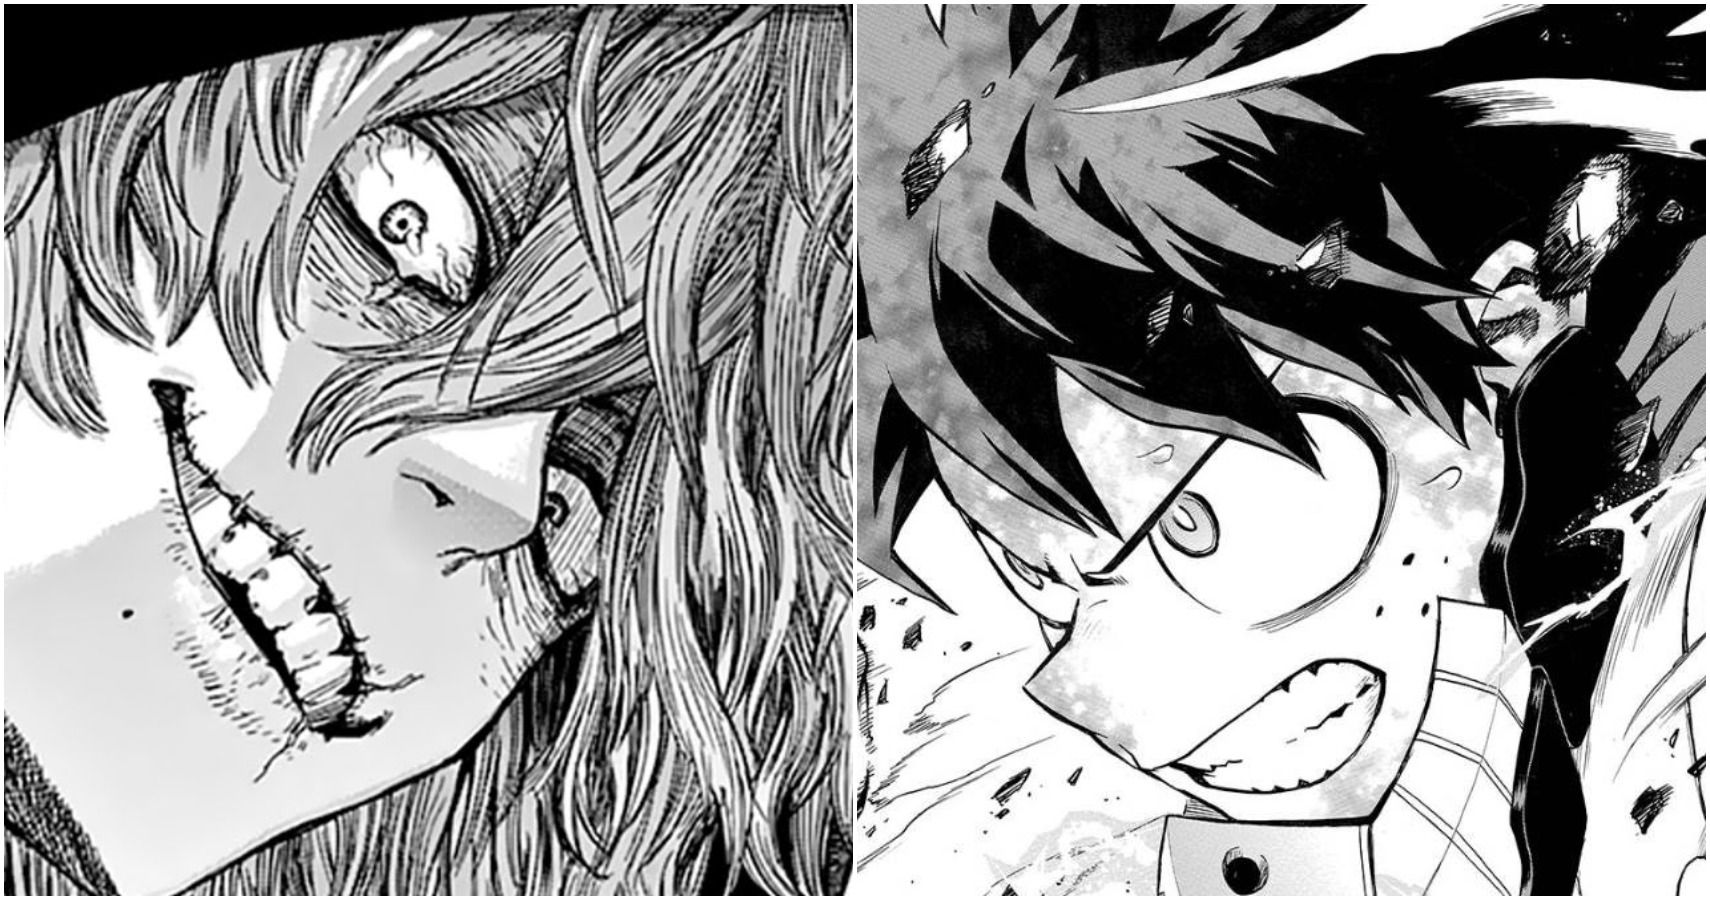 Final Manga Boku No Hero My Hero Academia: 5 Reasons Why The Manga Is Reaching Its Climax (& 5 Great  Ideas For A Sequel)